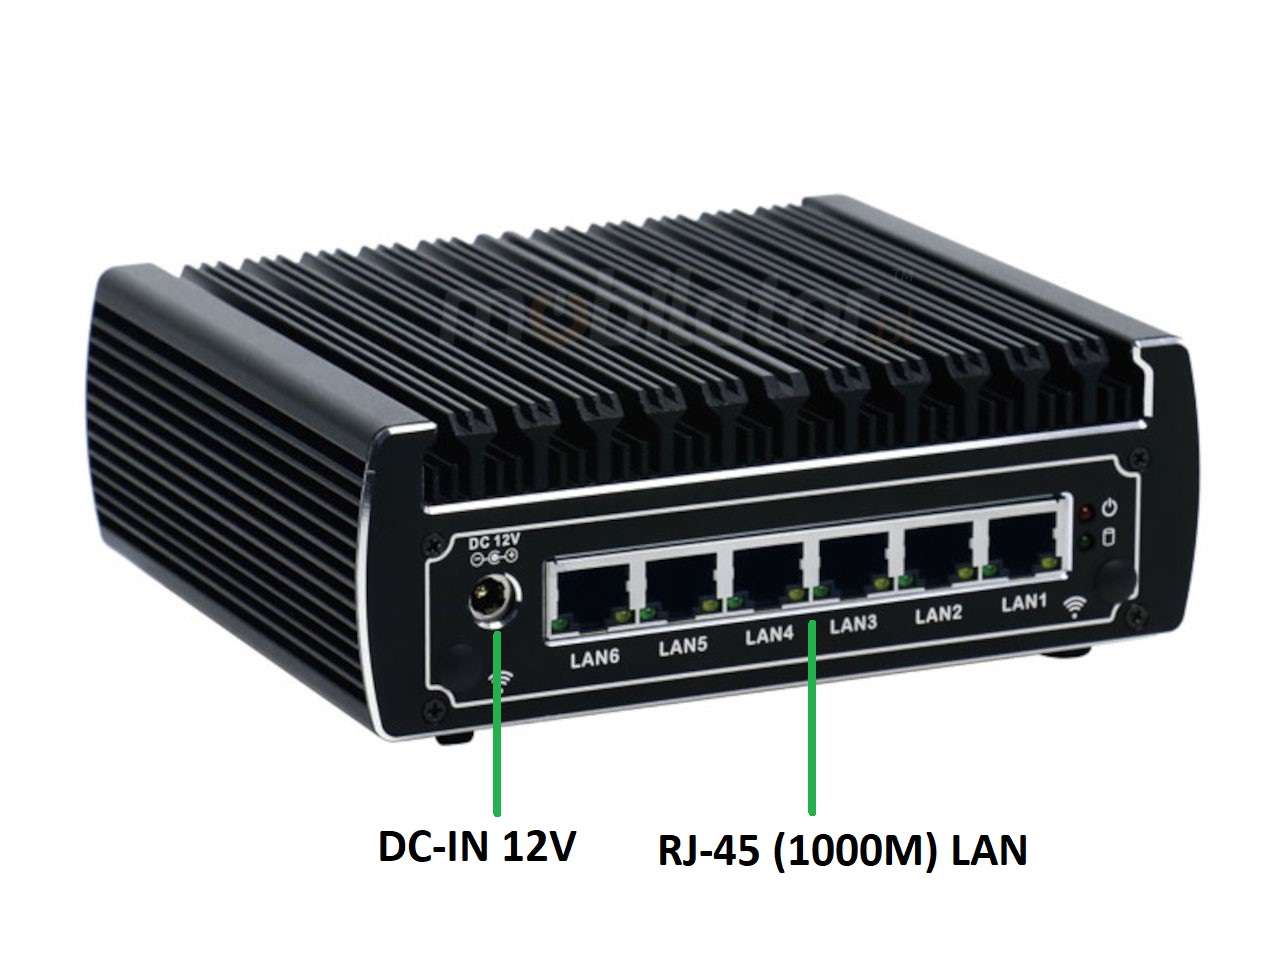  IBOX N133 v.4, back IO, industrial small fast reliable intel fanless industrial small LAN INTEL i3 SSD DDR4